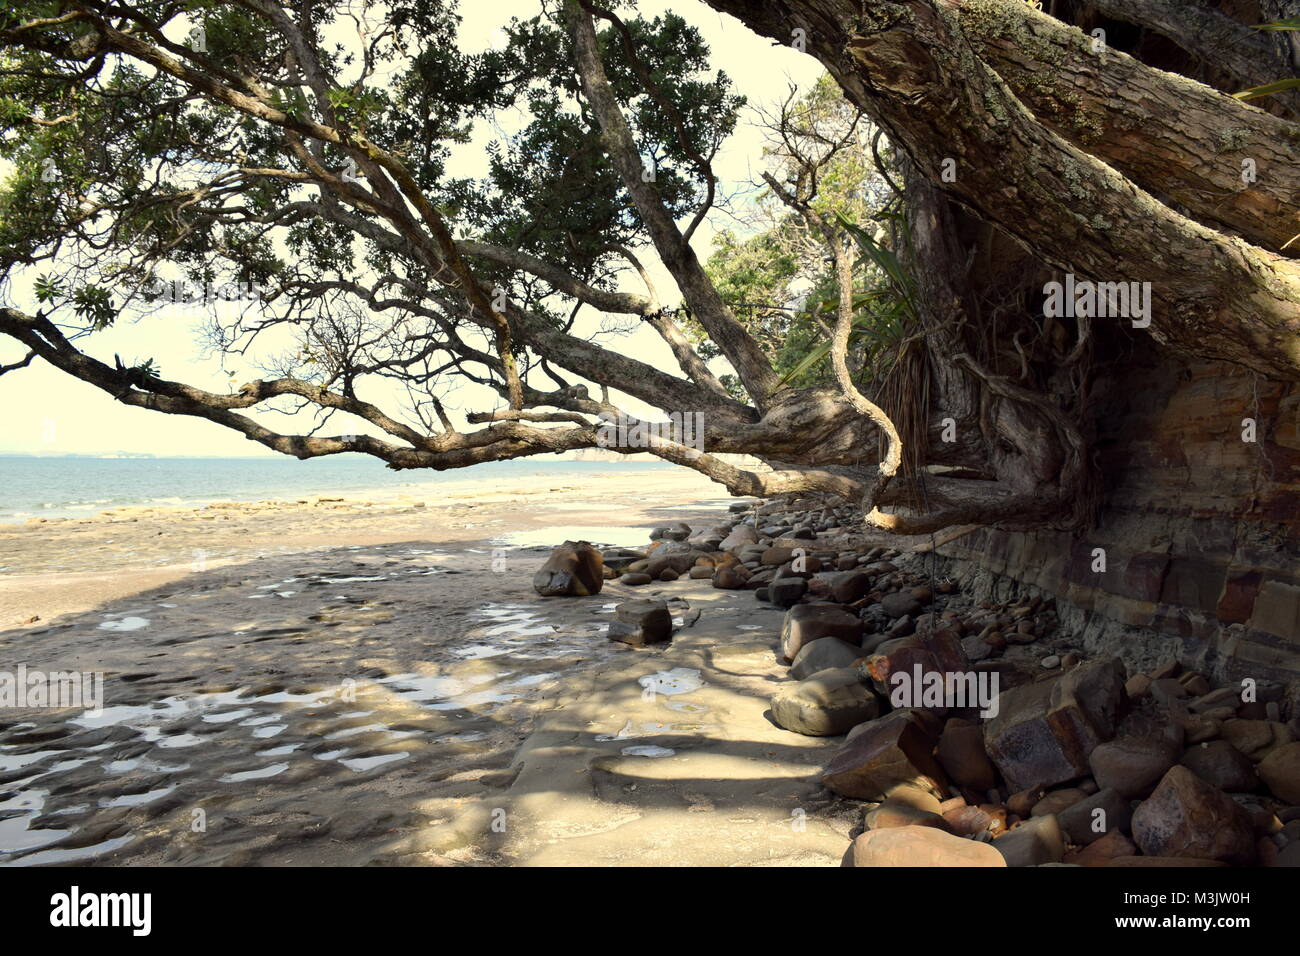 Tree hanging to beach in New Zealand Stock Photo